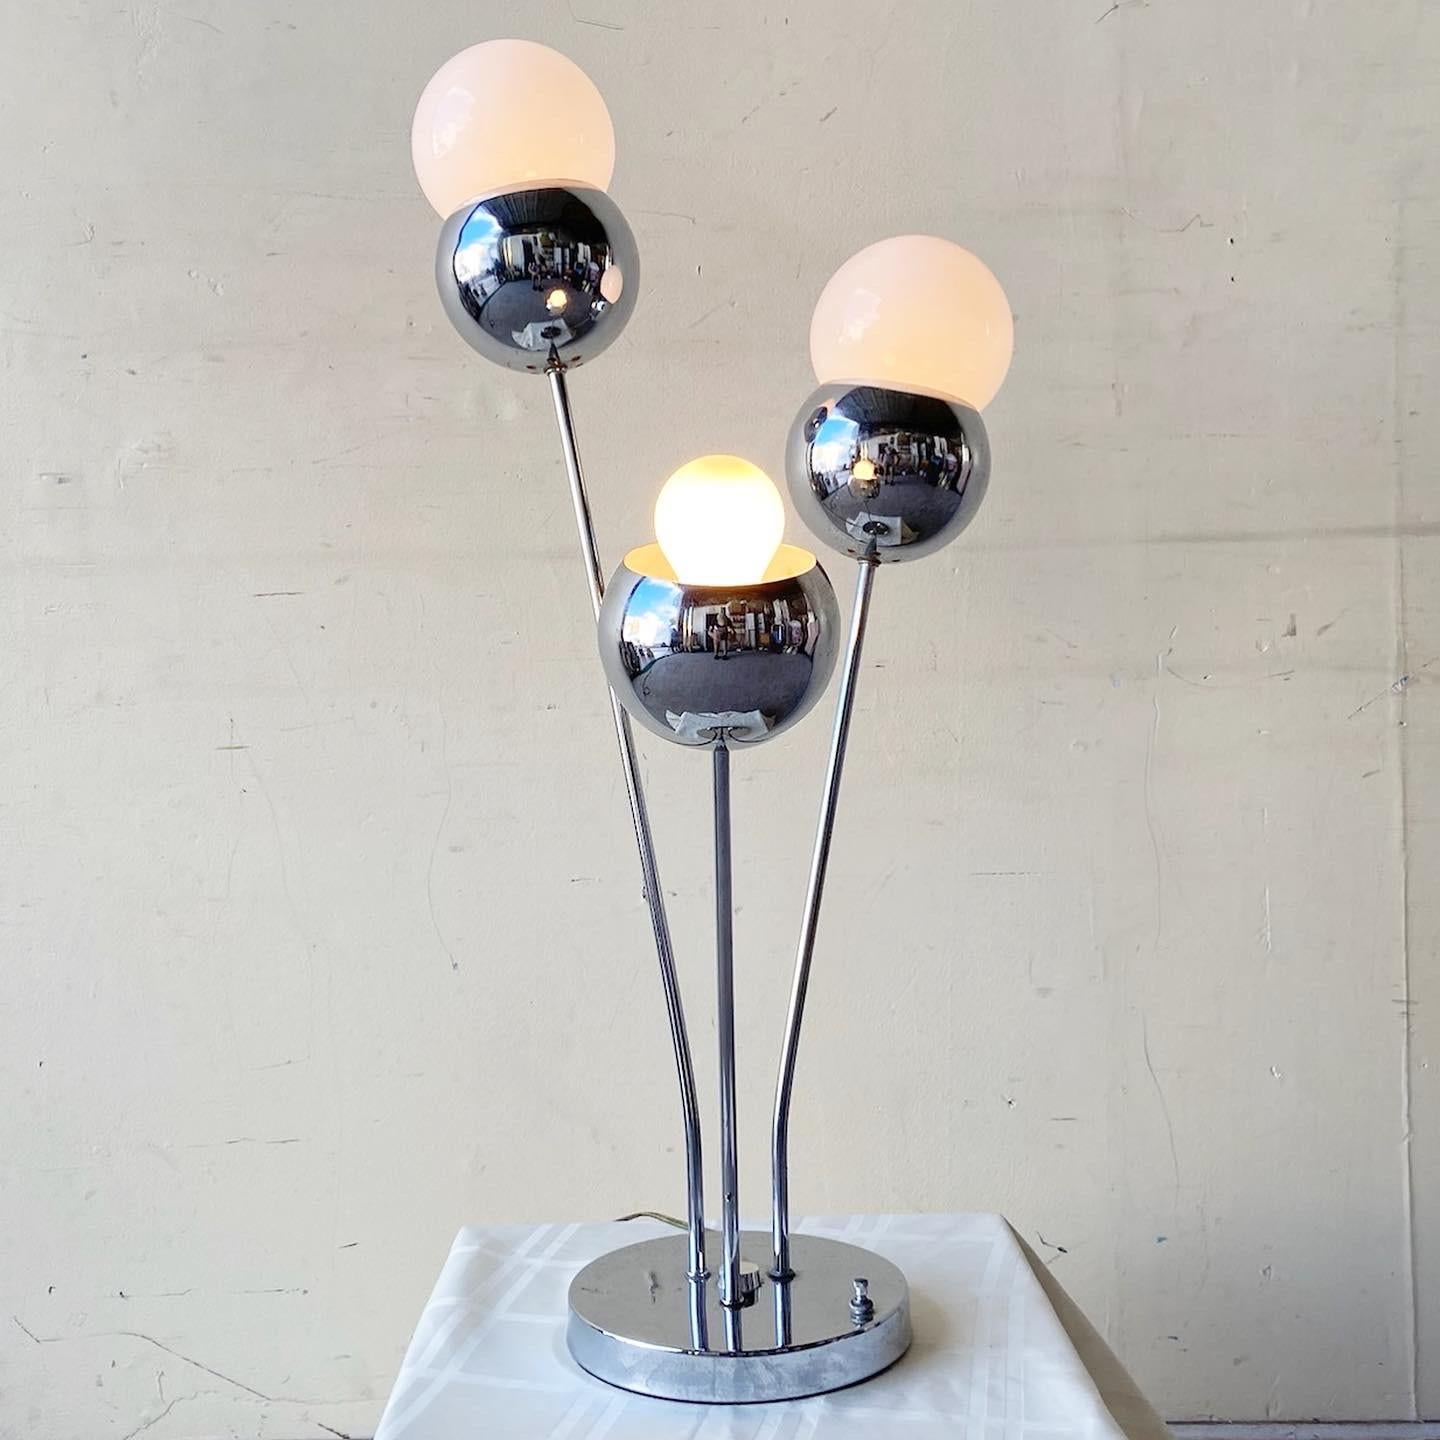 Exceptional mid century modern space age table lamp in the style of Robert Sonneman. Features a chrome finish with a bulbous fixture for larger lightbulbs as is meant to be displayed. 